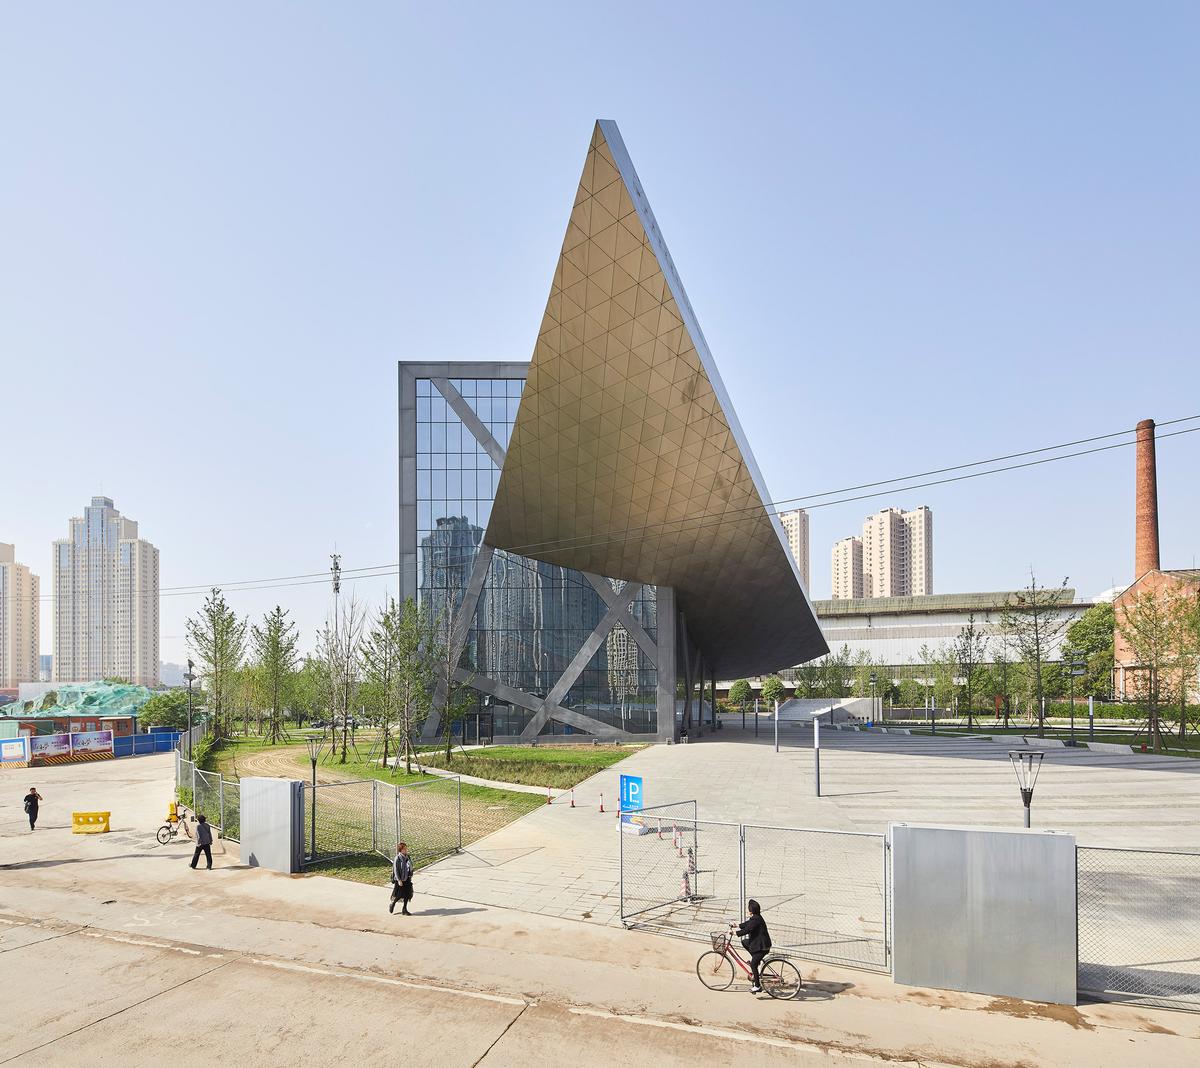 The museum’s upwards bowed central structure nods to ships sailing up and down the Yangtze river – which runs through the city